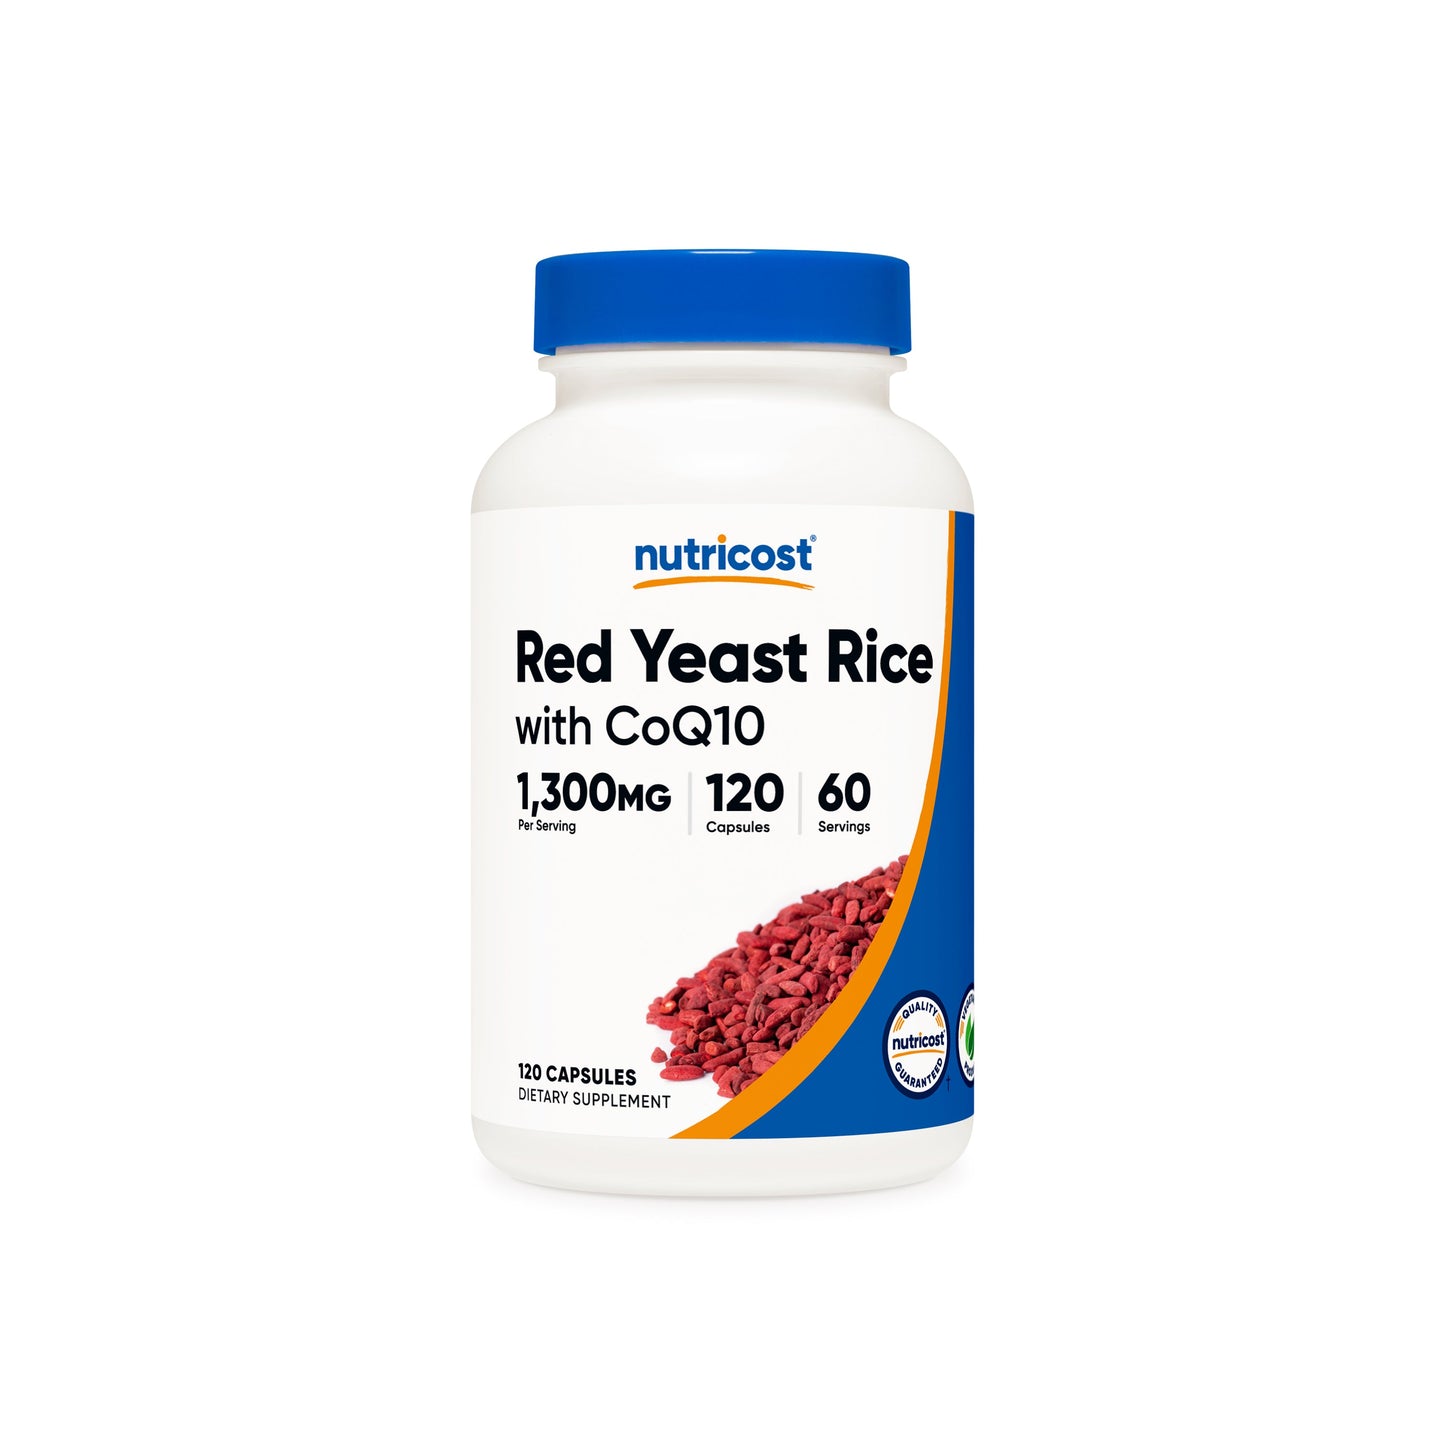 Nutricost Red Yeast Rice with CoQ10